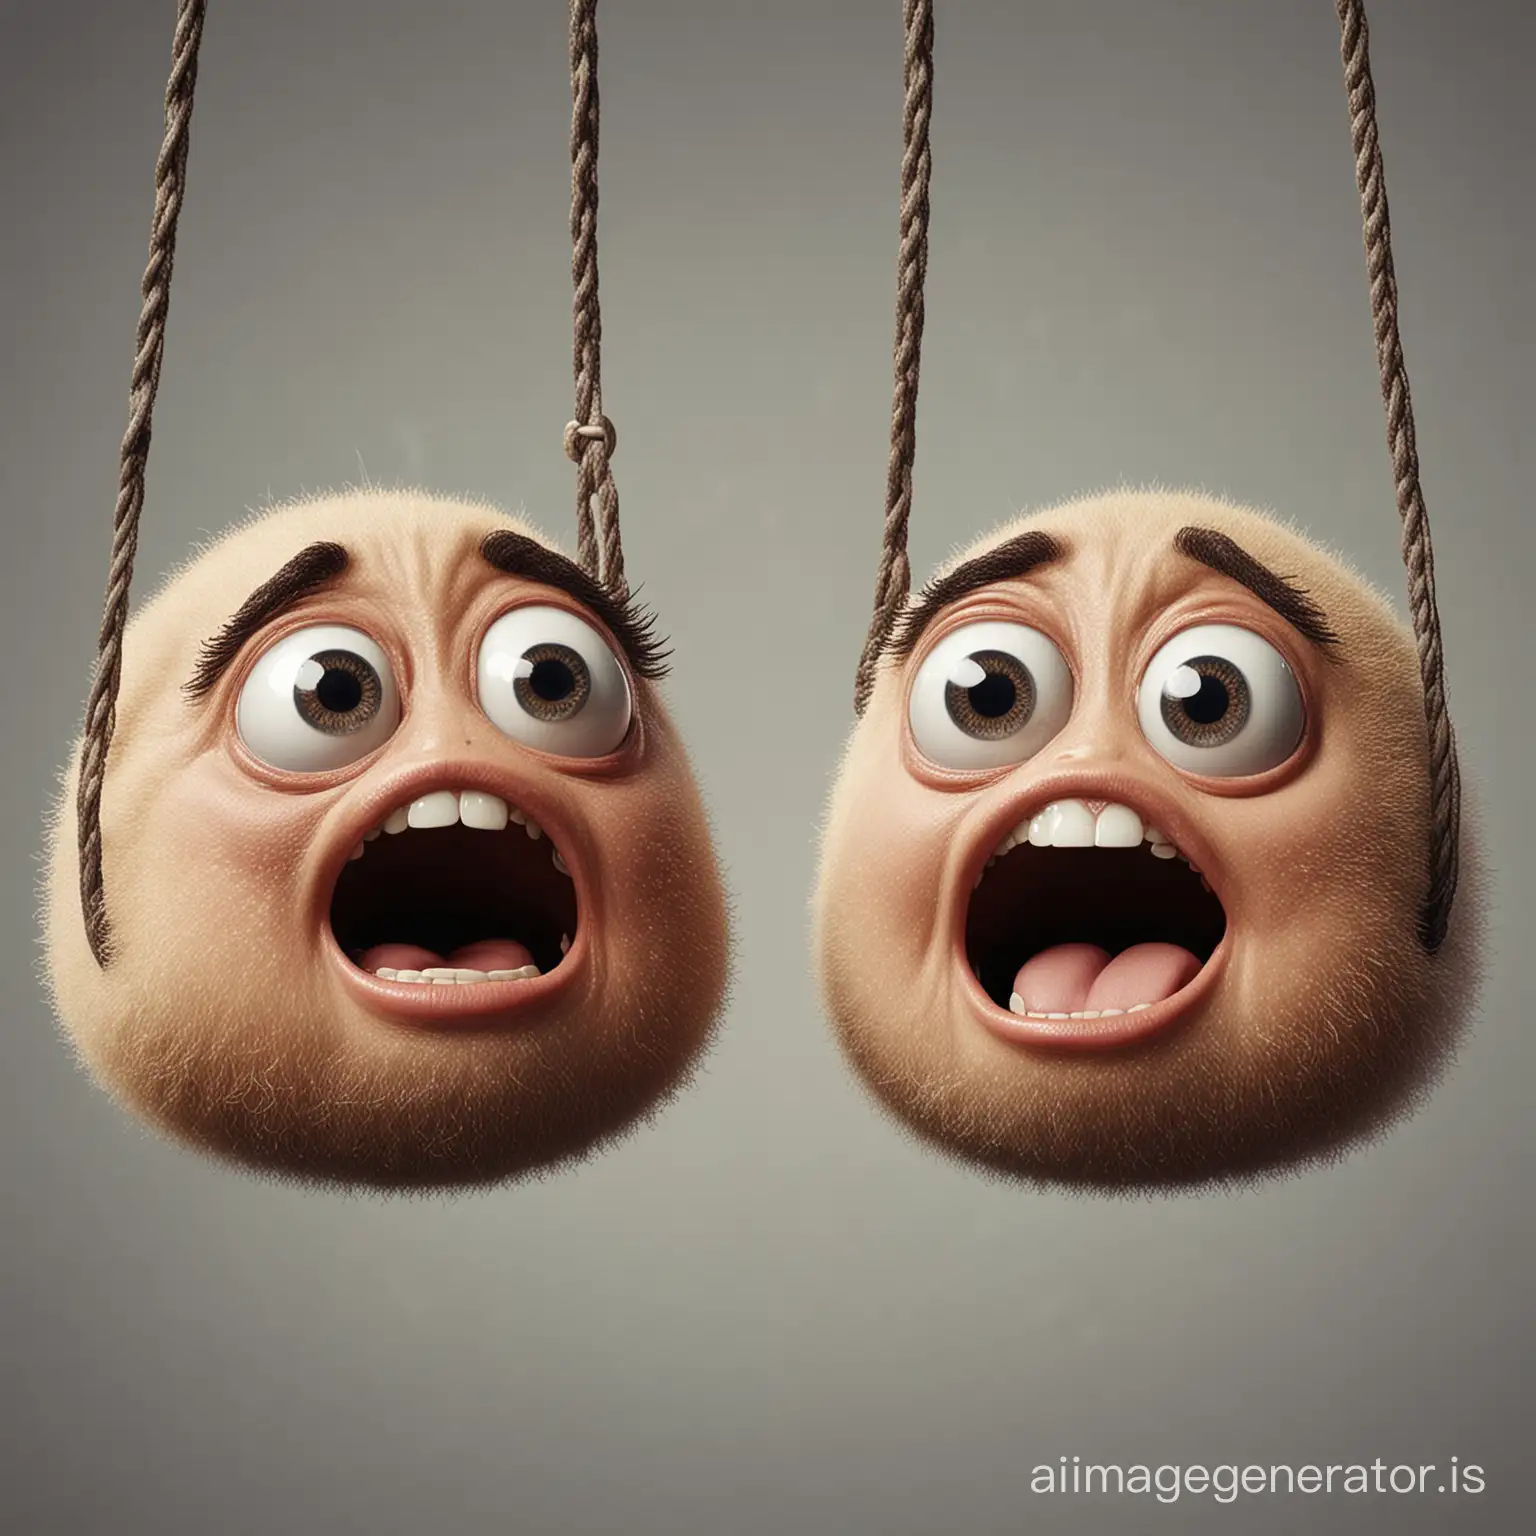 Animated-Swings-Conversing-with-Expressive-Faces